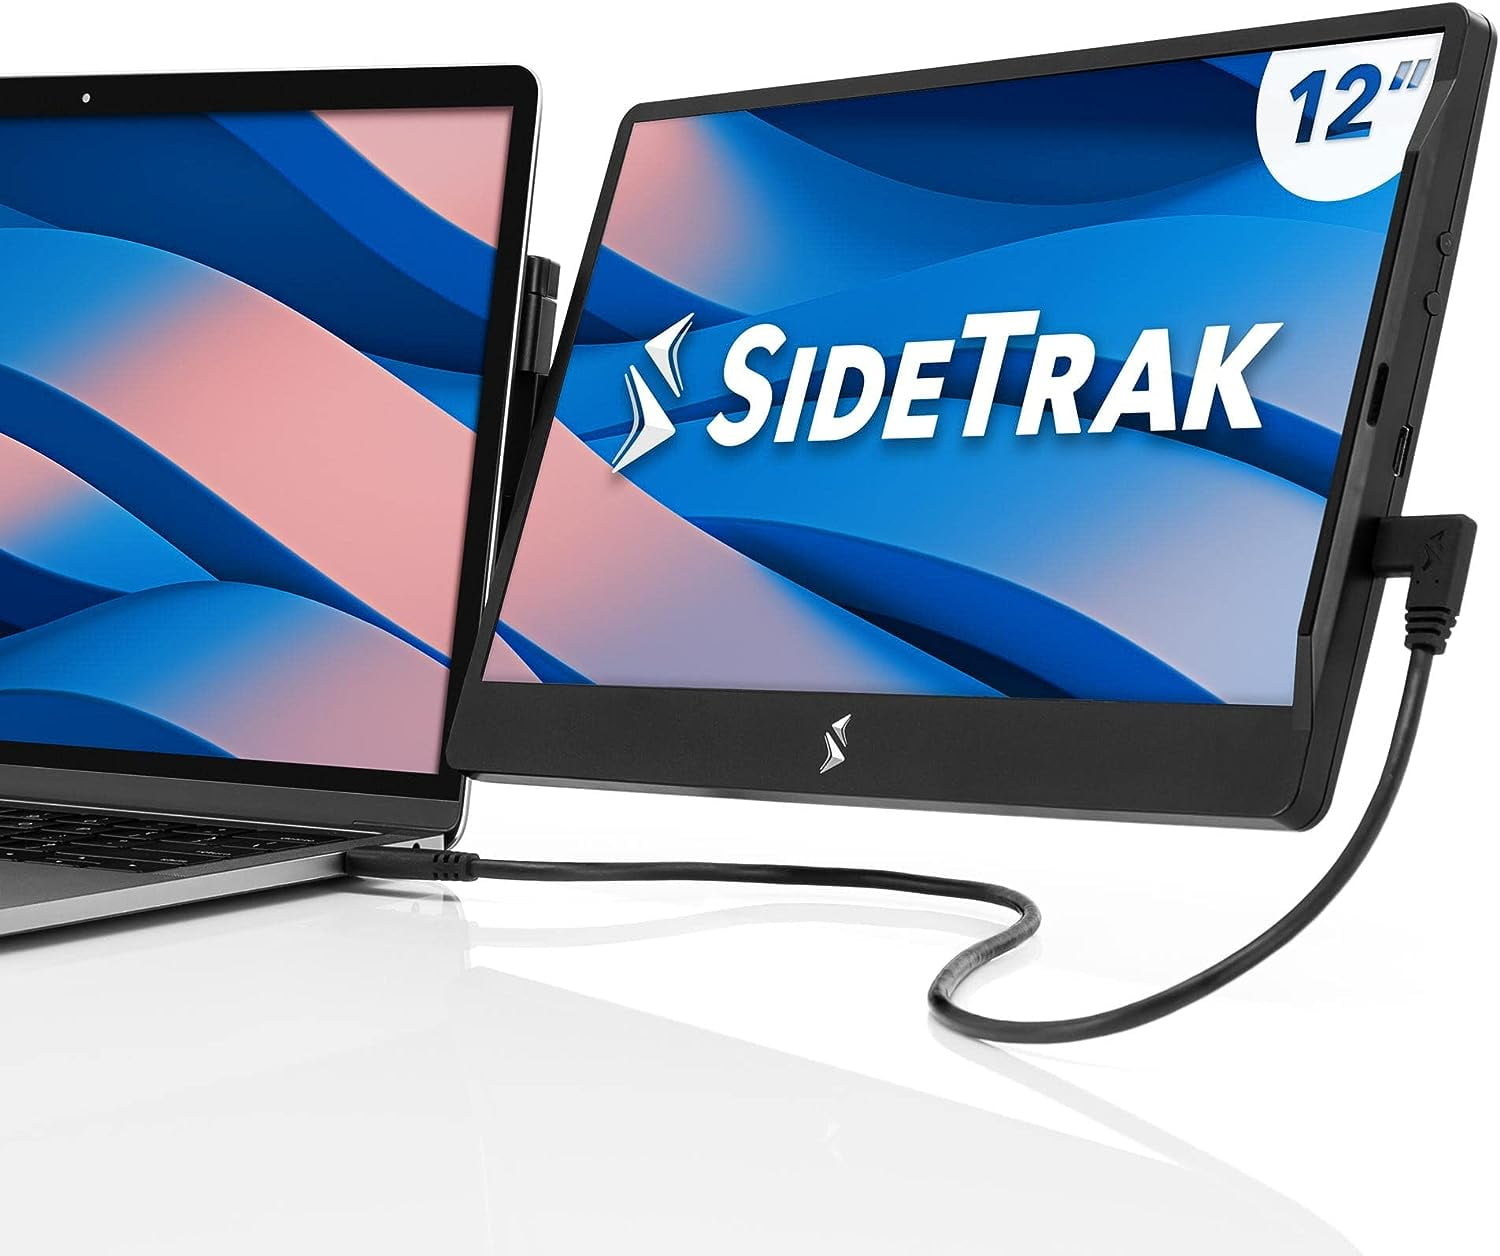 New SideTrak Swivel Attachable Portable Monitor for Laptop 12.5” FHD IPS  Rotating Dual Laptop Screen | Mac, PC, Chrome OS Compatible | All Laptop